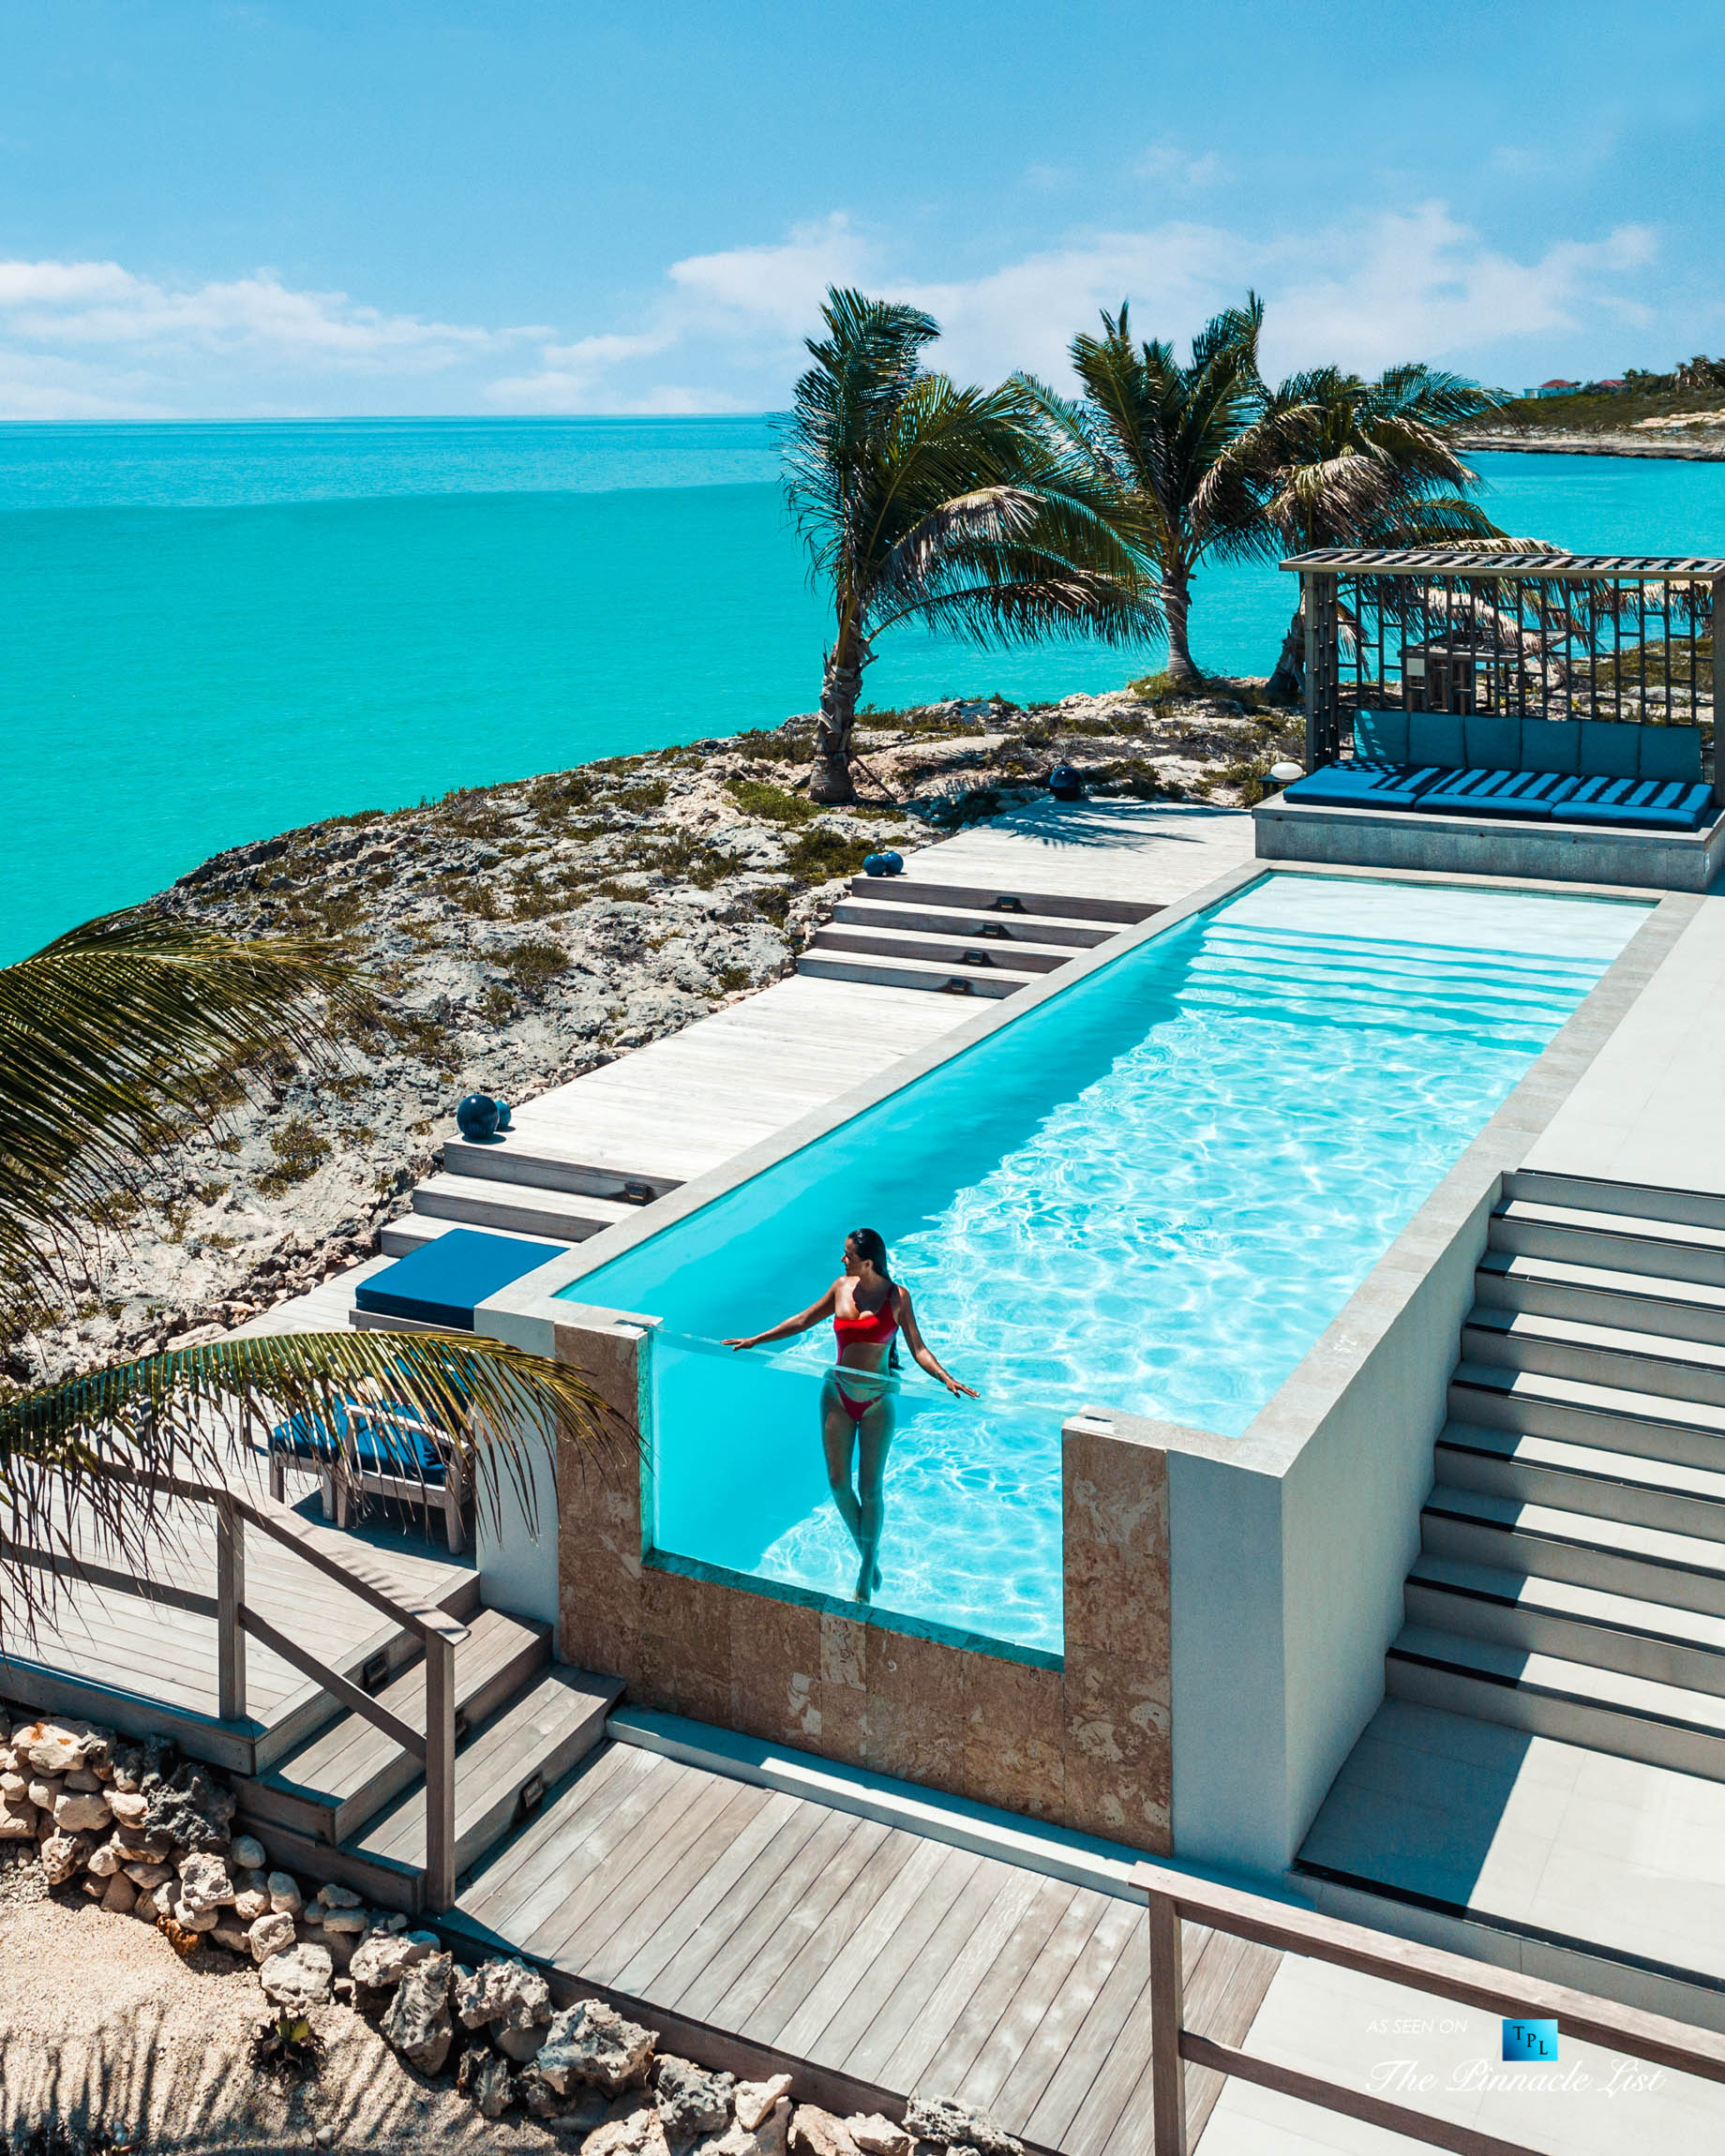 Tip of the Tail Villa - Providenciales, Turks and Caicos Islands - Turquoise Caribbean Water View Infinity Pool - Luxury Real Estate - South Shore Peninsula Home